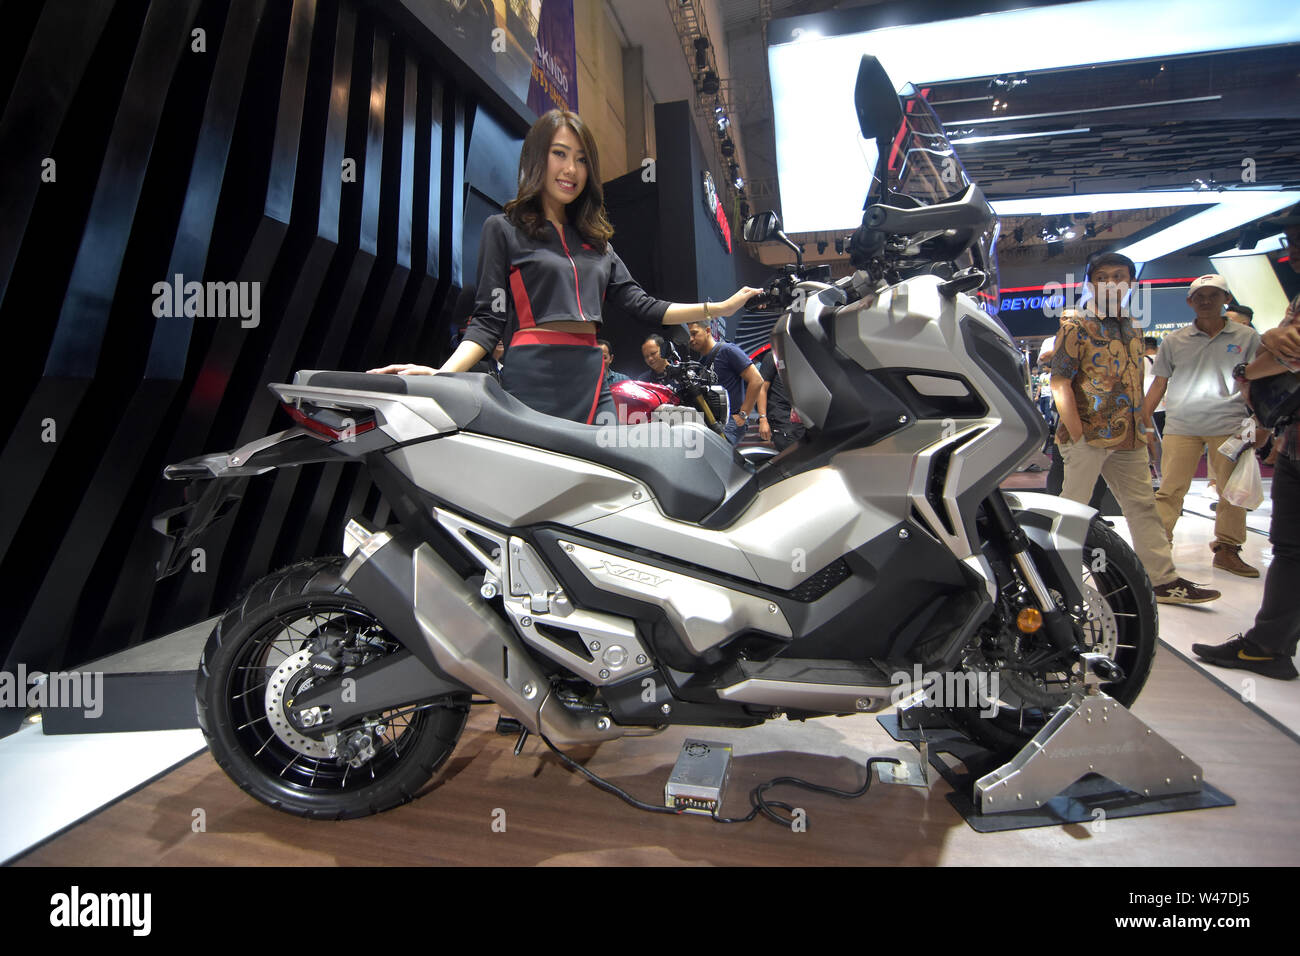 A Honda Adv X Adv 750 Motorbike Displayed At The Convention Exhibition During The Motor Show In Tangerang The Gaikindo Indonesia International Auto Show Giias Is The Largest Auto Show In Indonesia It Was